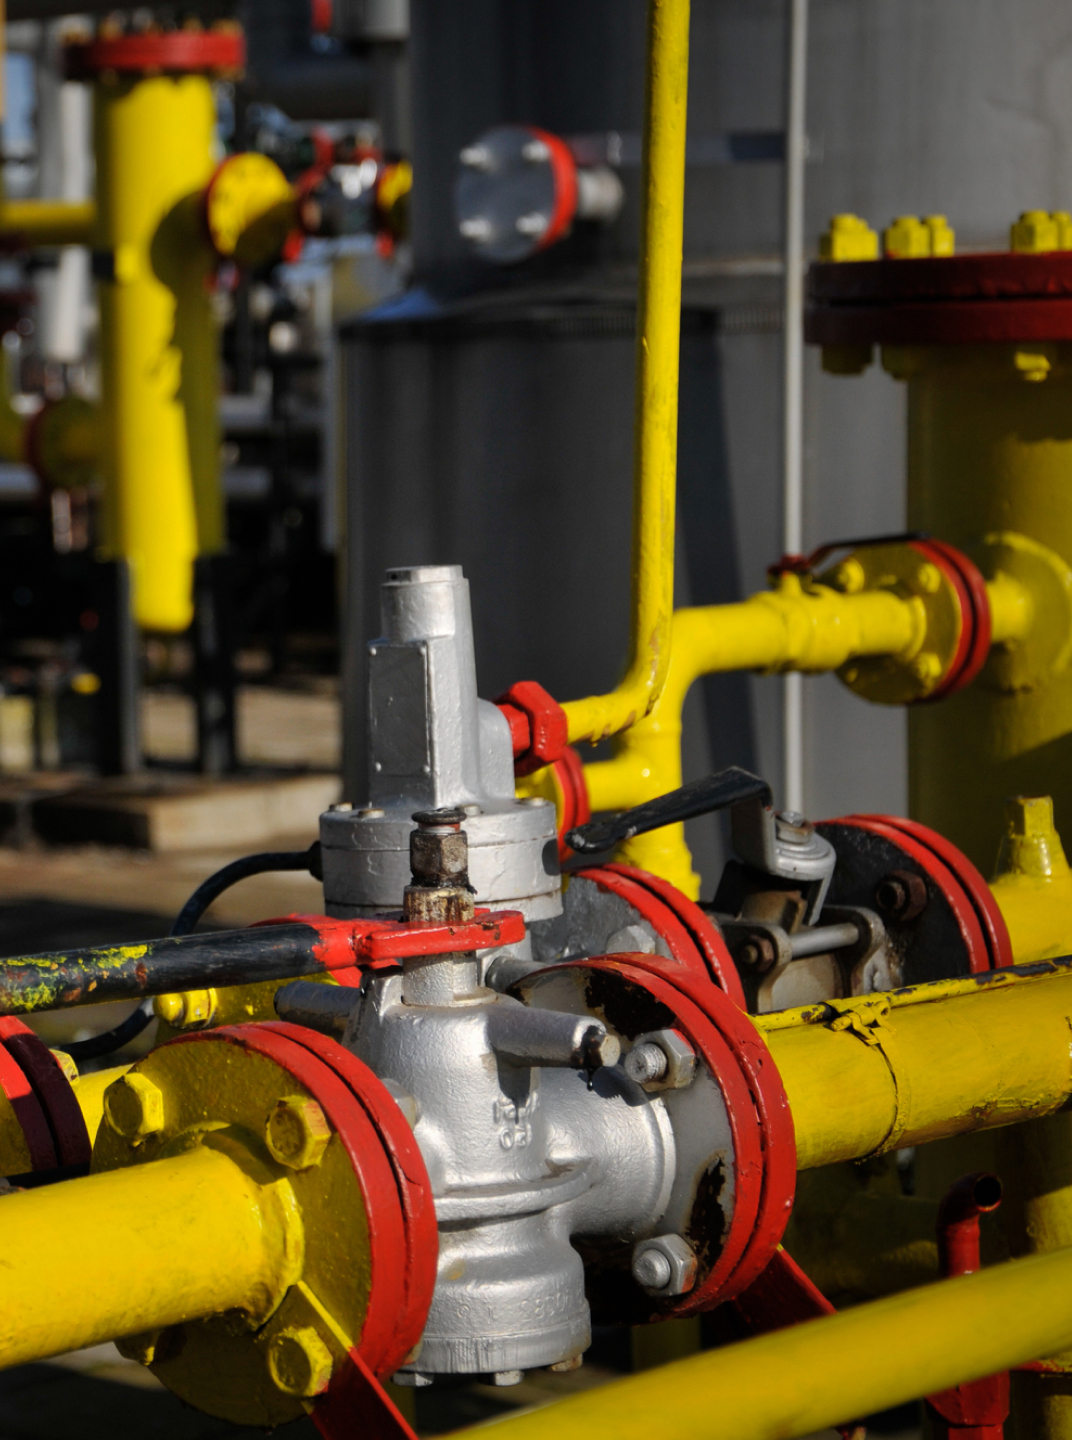 Professional Gas Line Services Near You in NYC Area - PA Mechanical